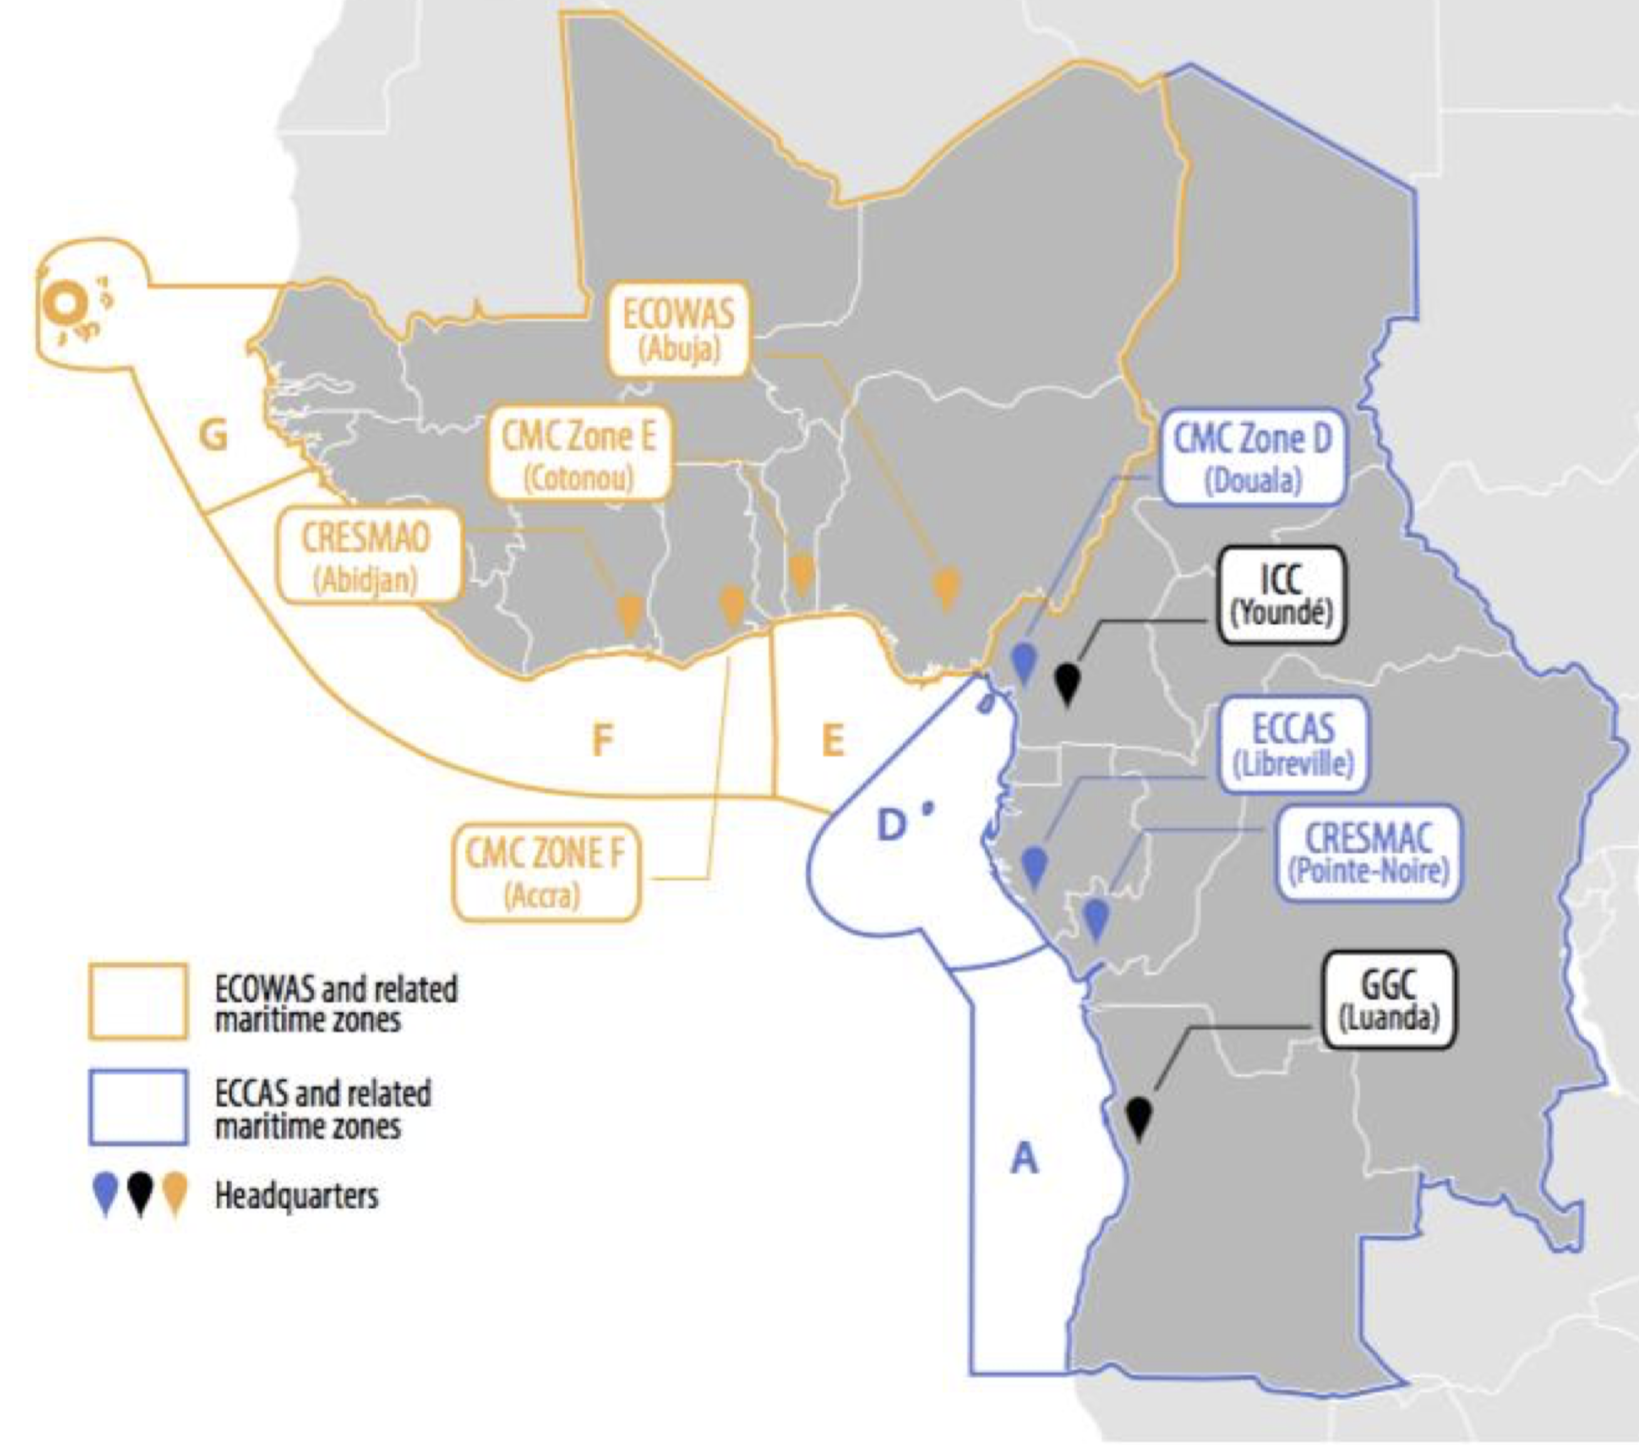 ICC and CMC Gulf of Guinea outline with ECOWAS and ECCAS related maritime zones.